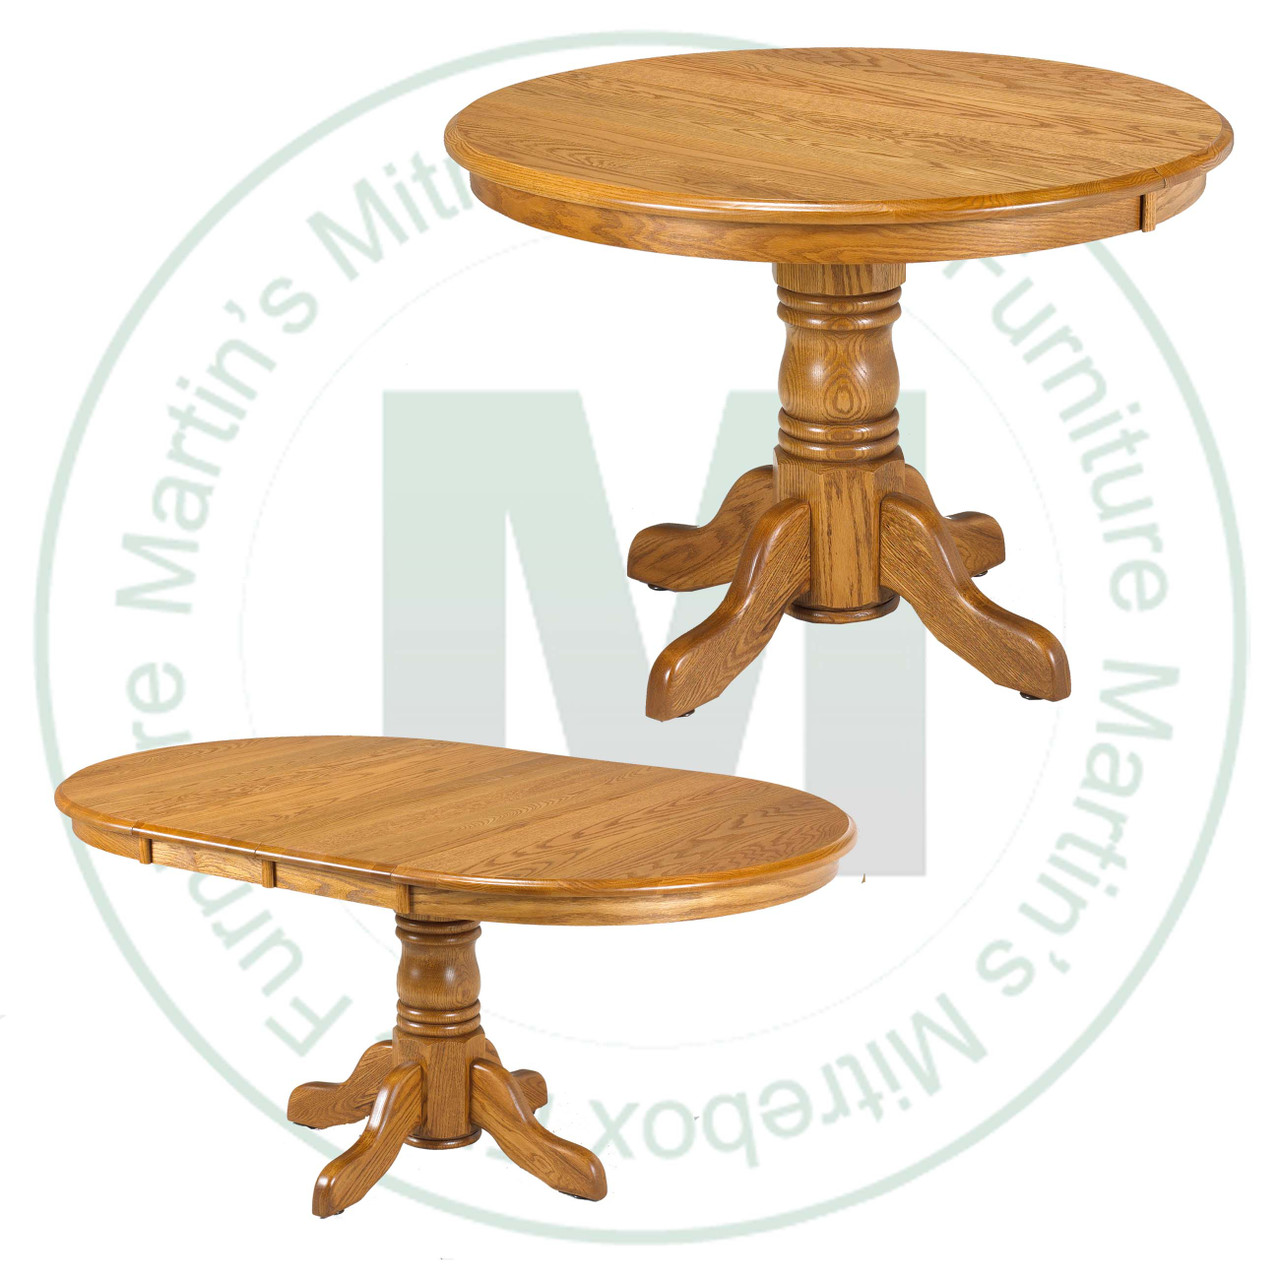 Wormy Maple Lancaster Collection Single Pedestal Table 36''D x 42''W x 30''H With 1 - 12'' Leaf. Table Has 1'' Thick Top